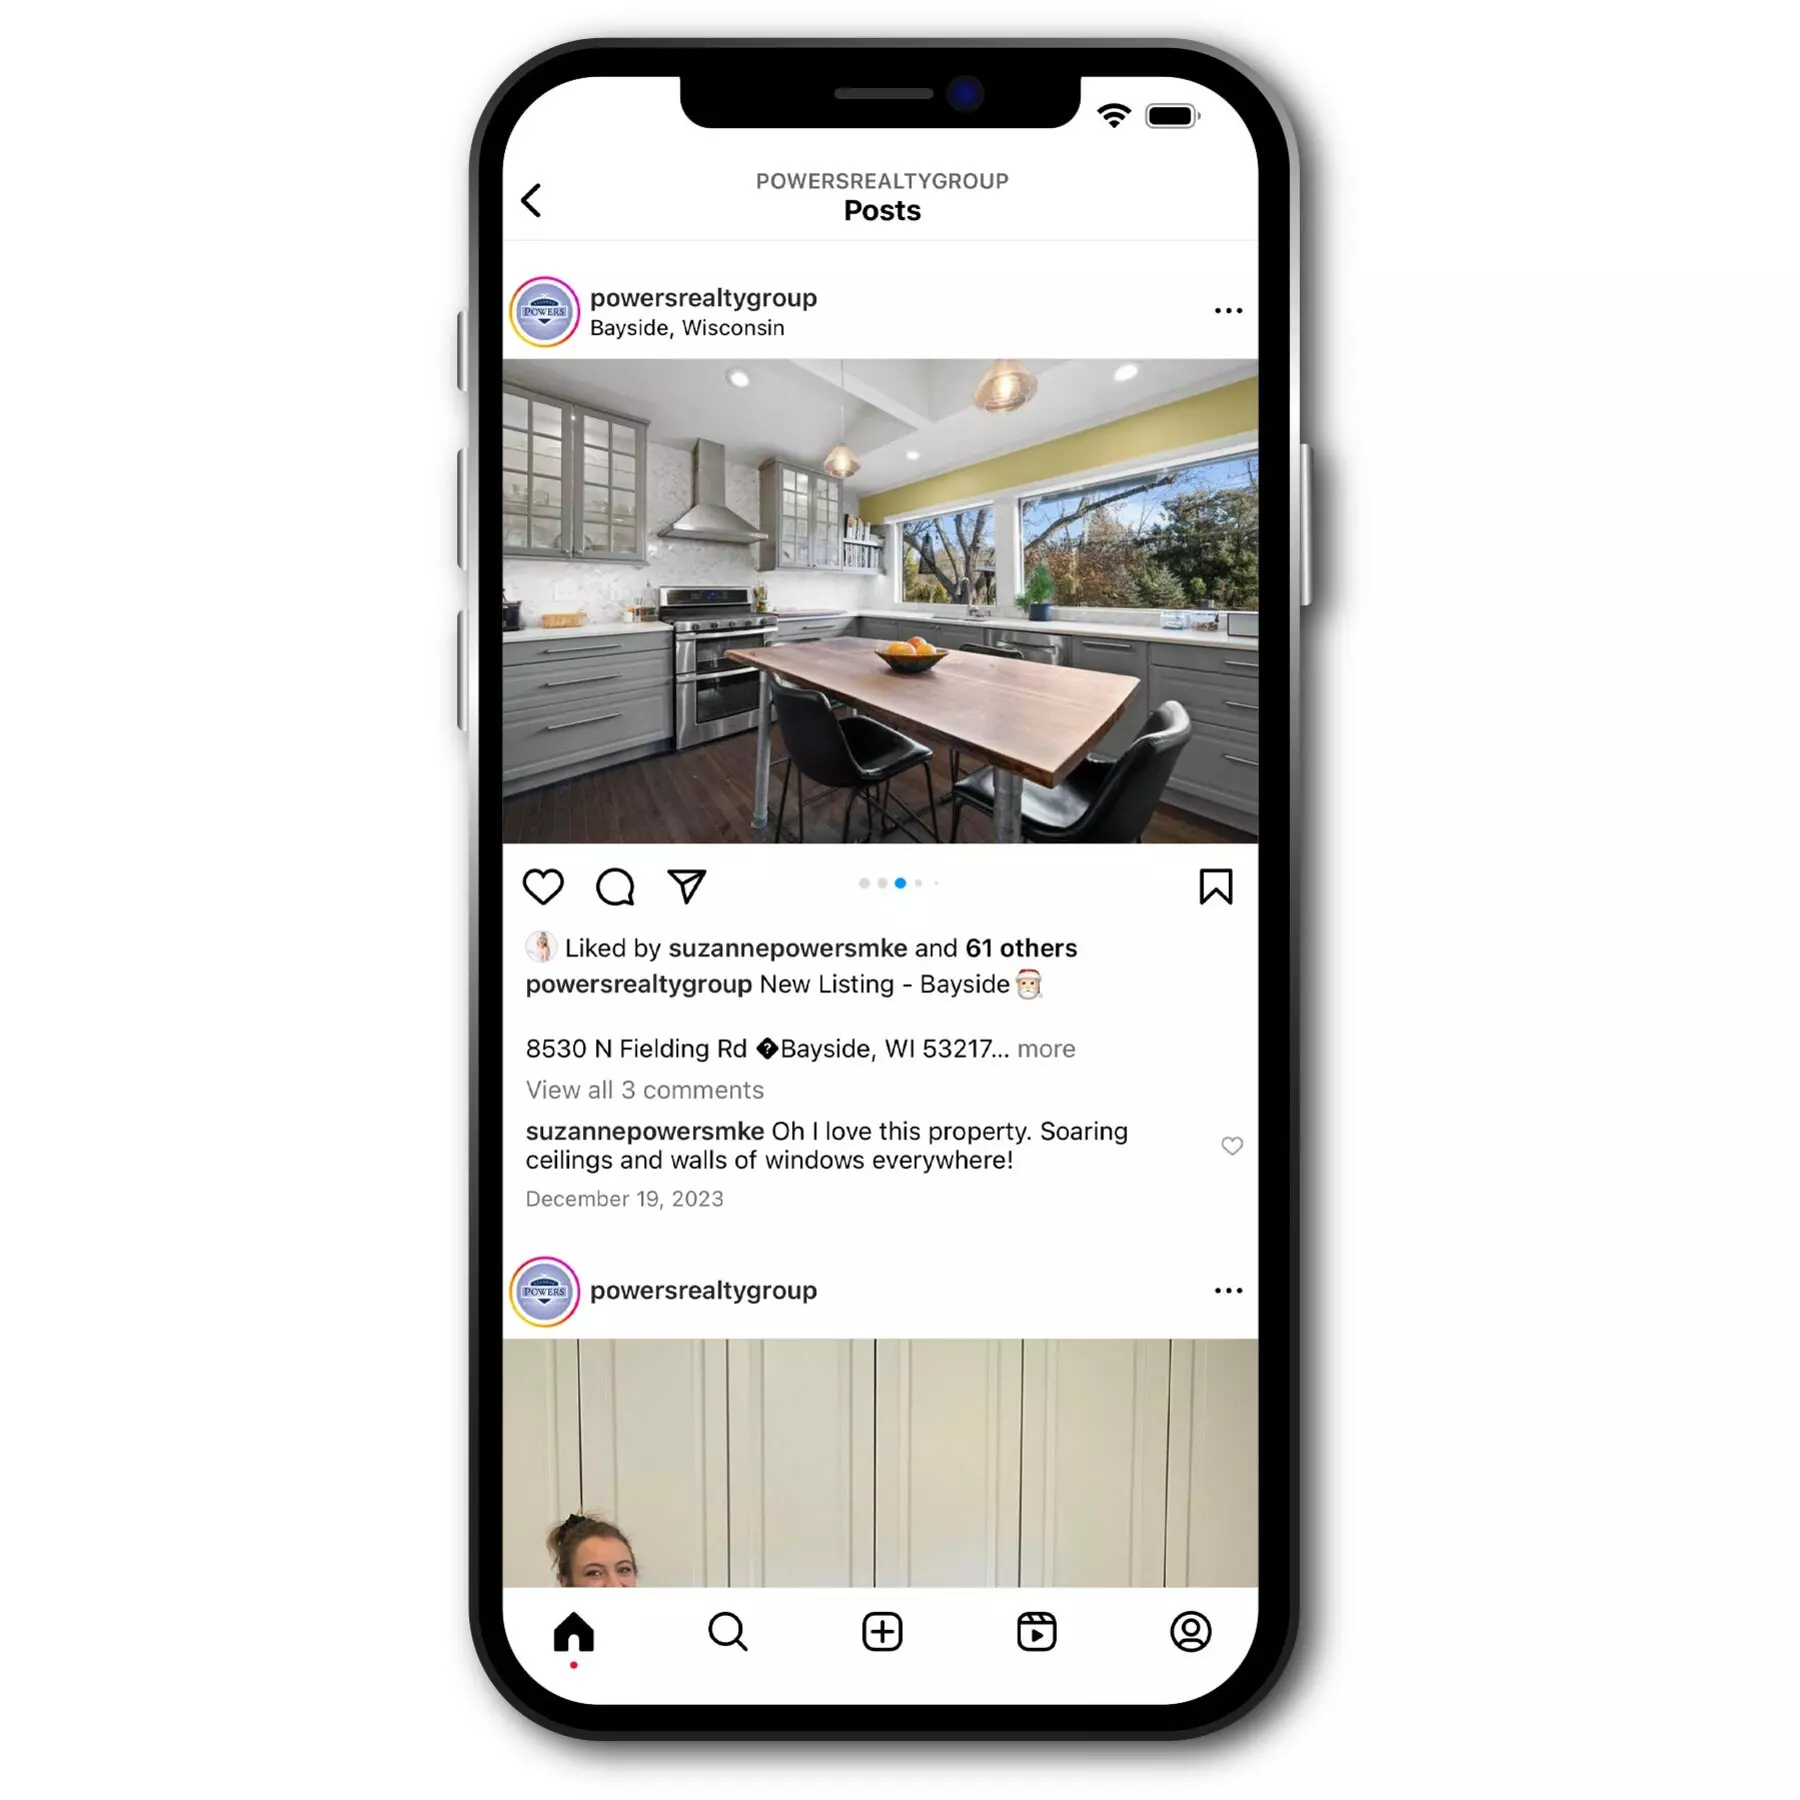 Powers Realty Group Instagram New Listings